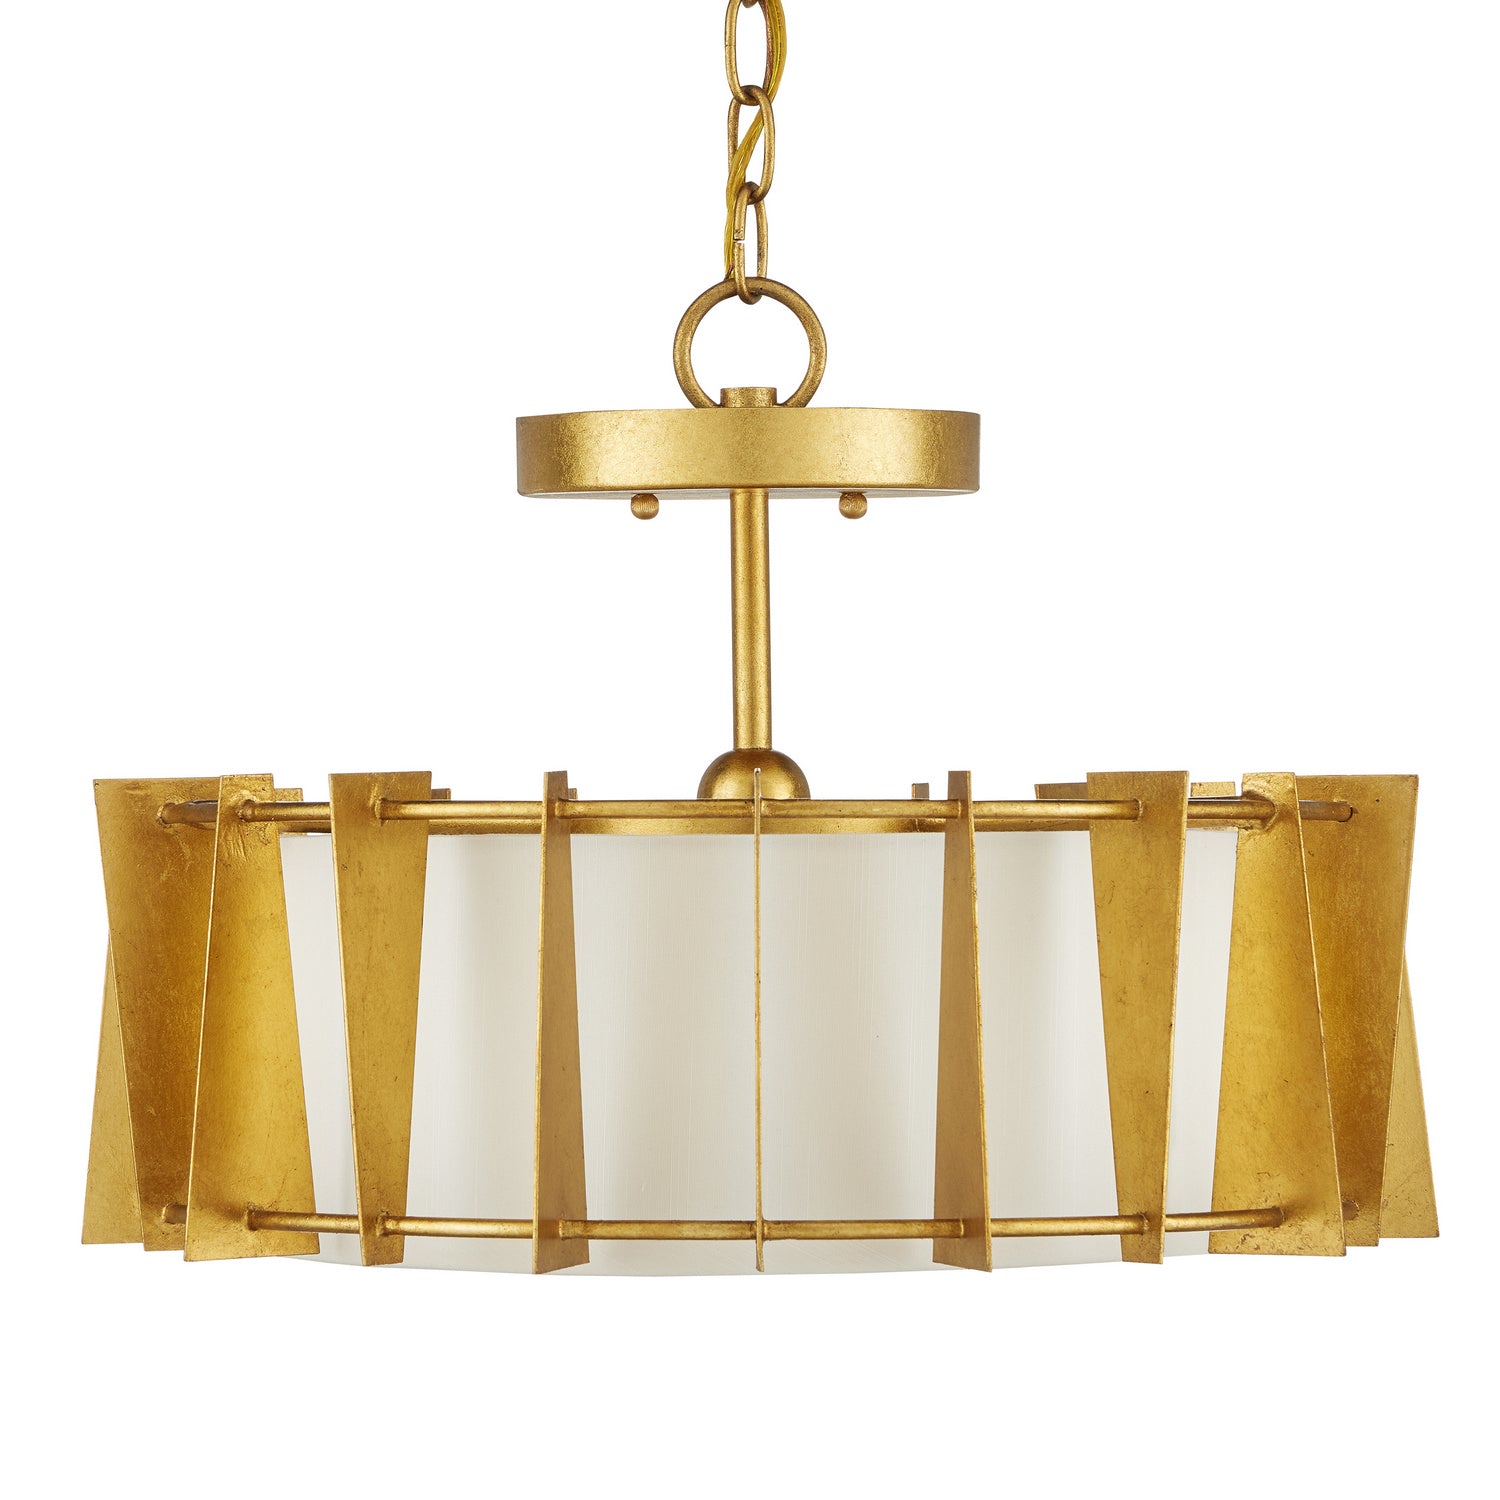 One Light Semi-Flush Mount from the Berwick collection in Contemporary Gold Leaf finish